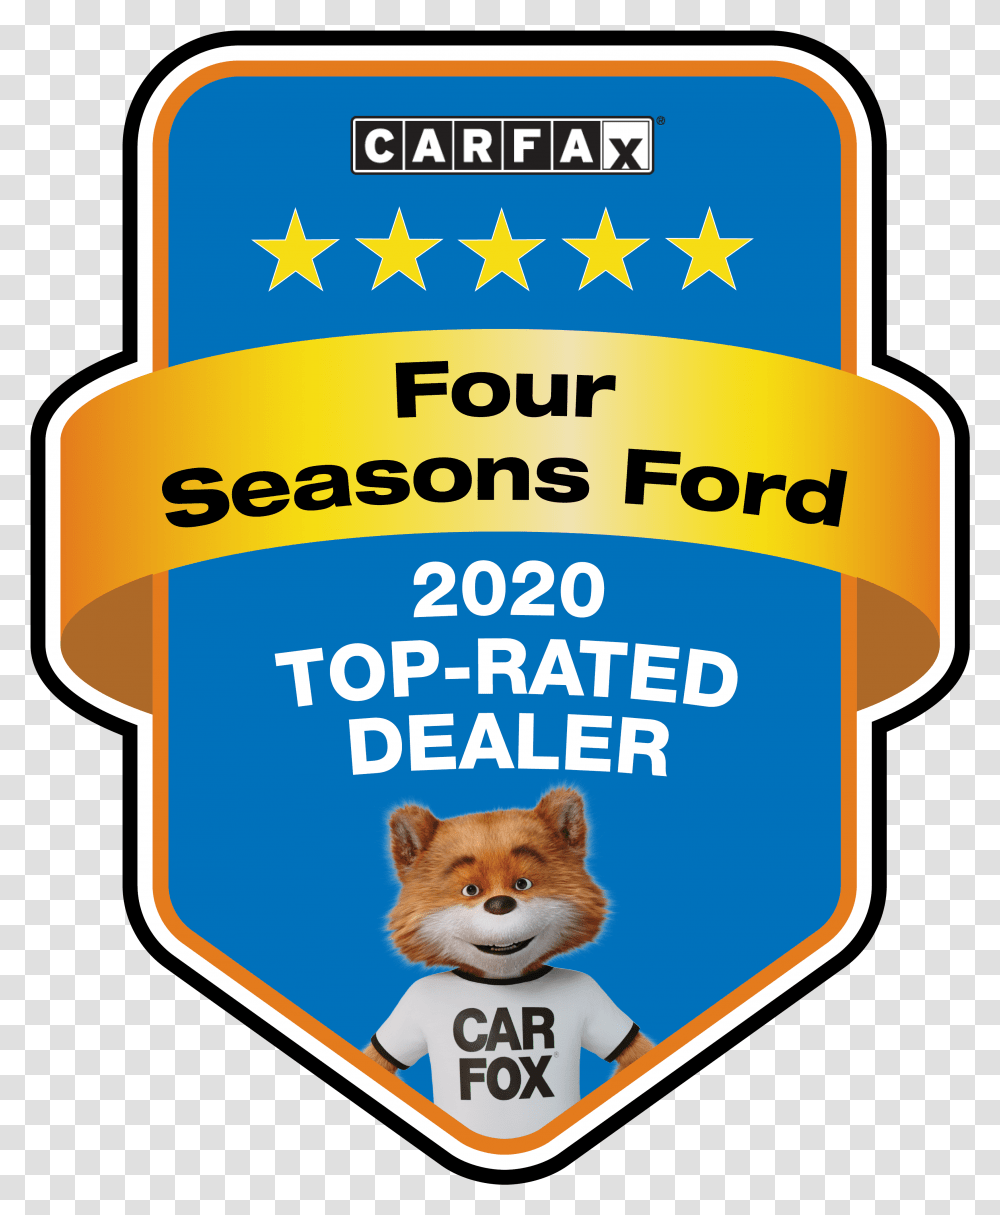 Used Cars Trucks Vans Suvs For Sale In Hendersonville Nc 2020 Top Rated Dealer Carfax, Label, Text, Logo, Symbol Transparent Png